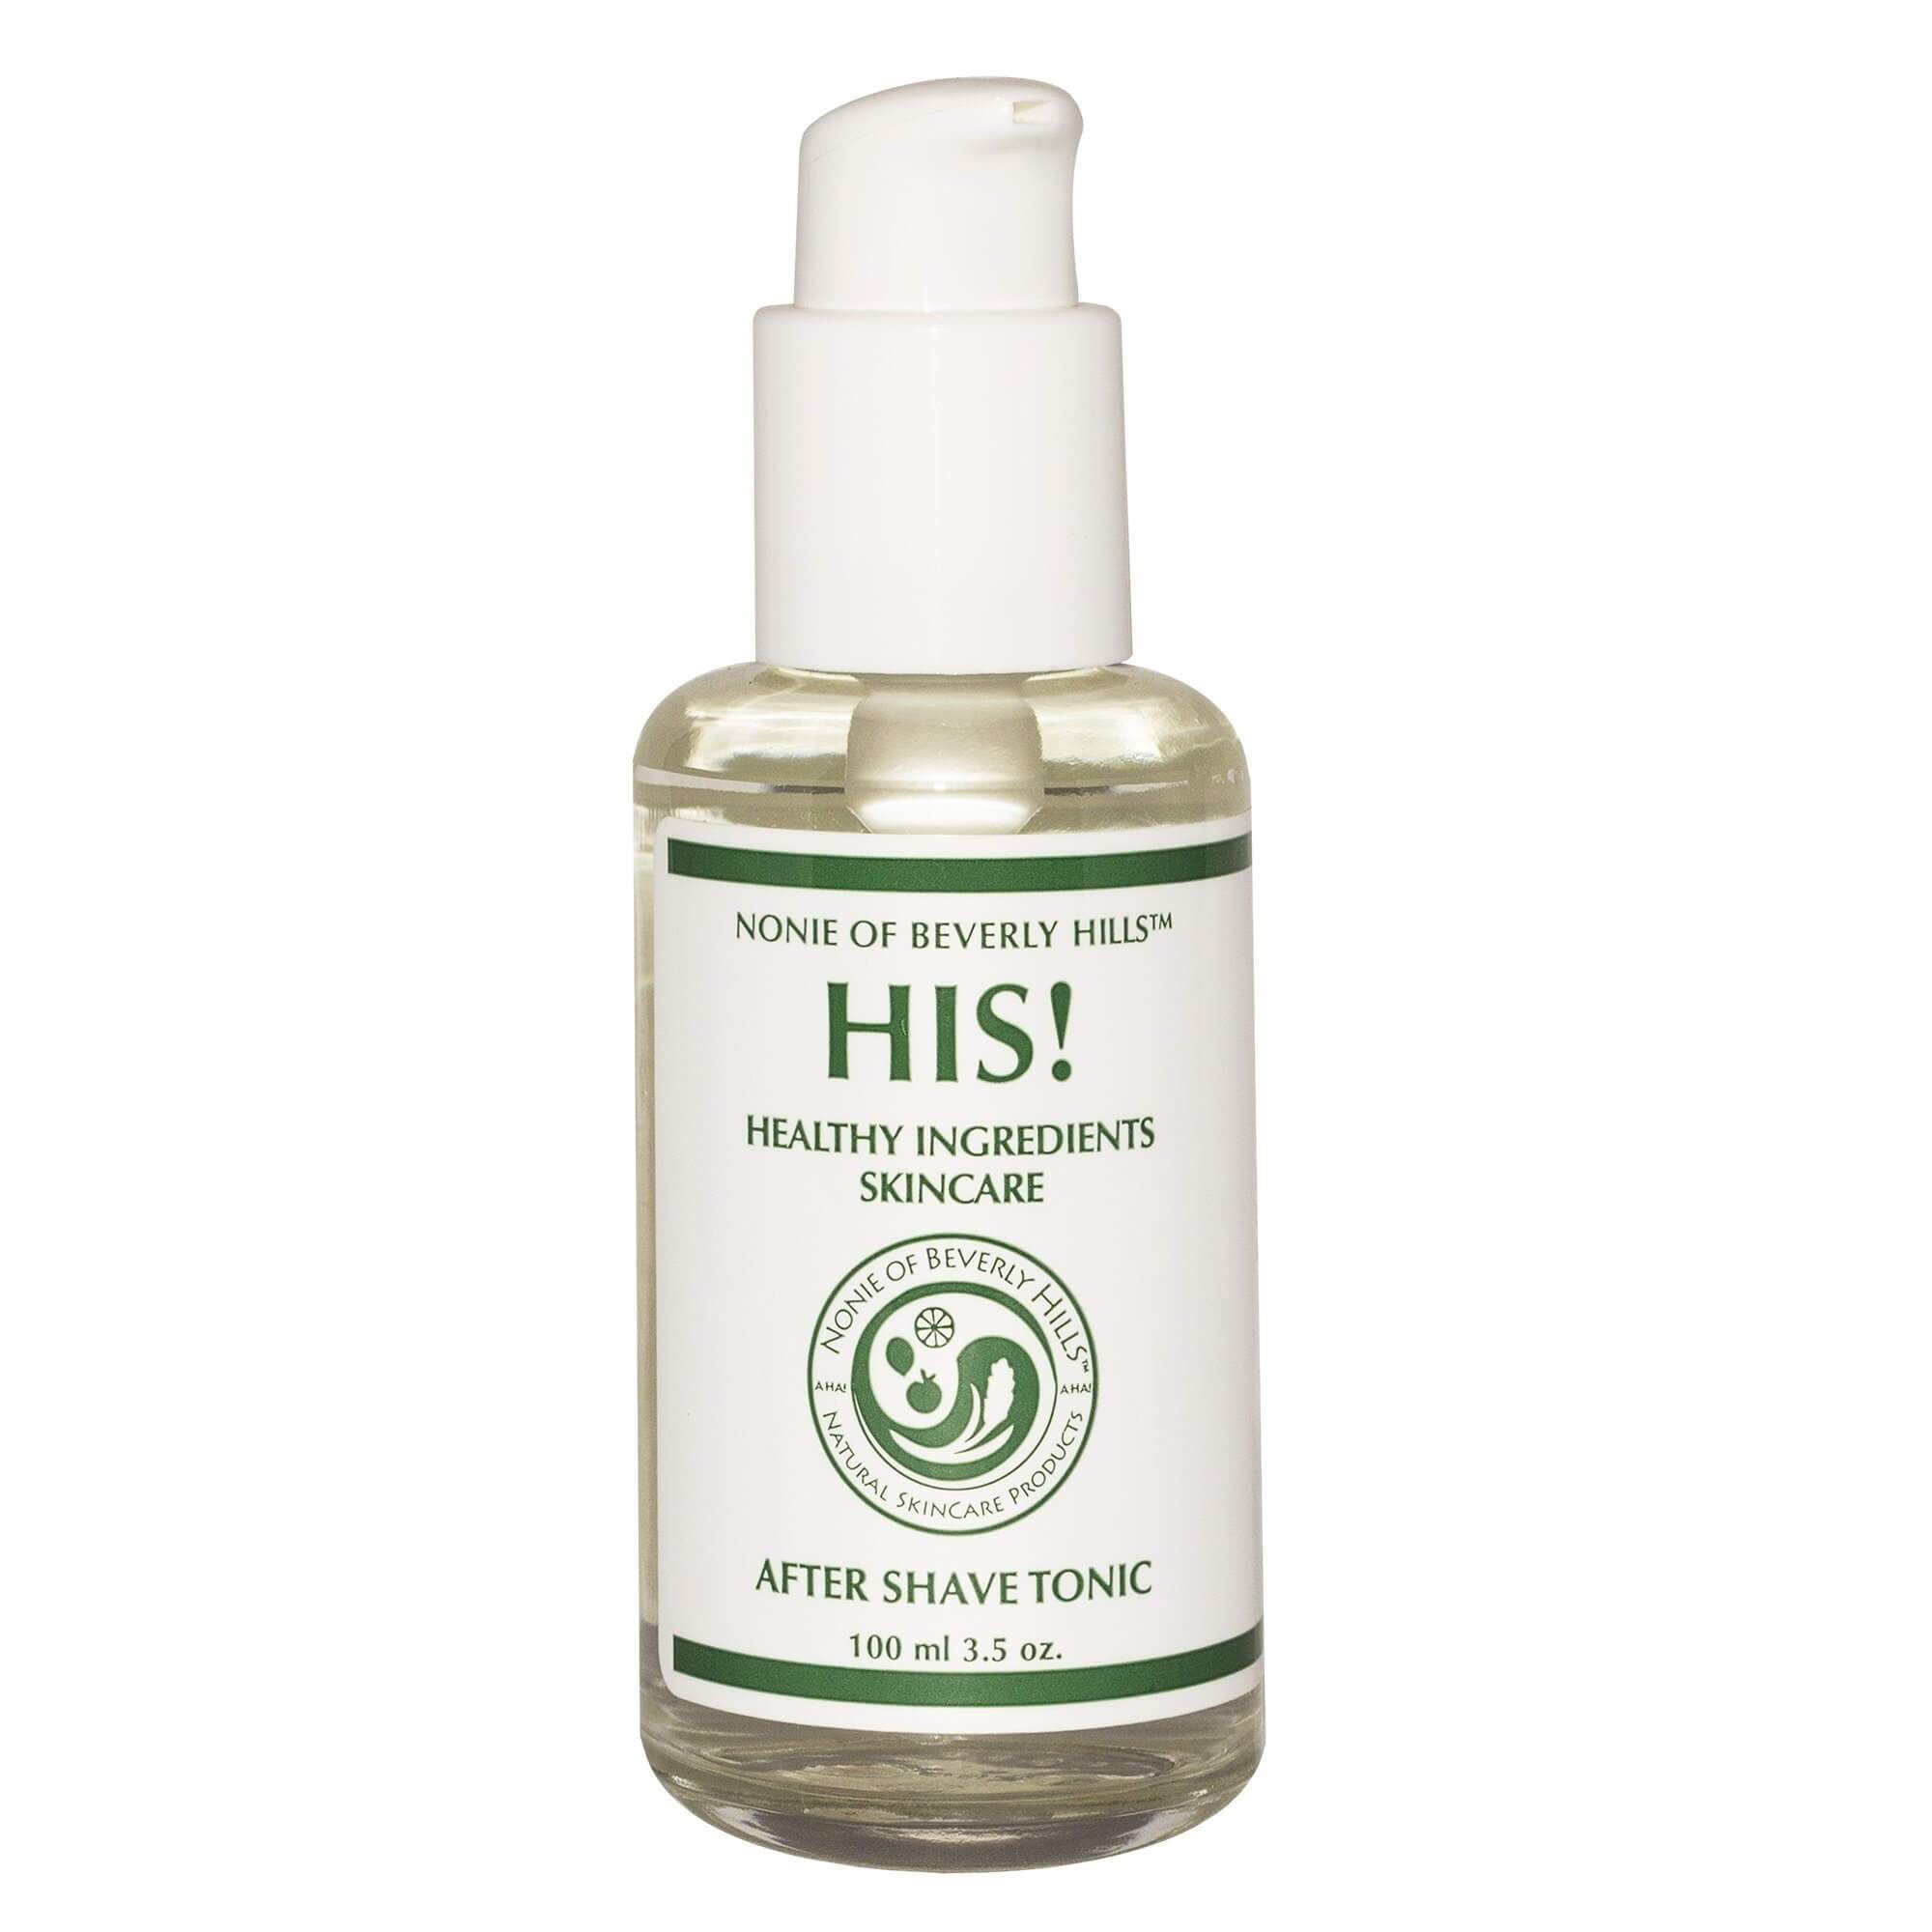 HIS! After Shave Tonic 3.5 oz - Nonie of Beverly Hills